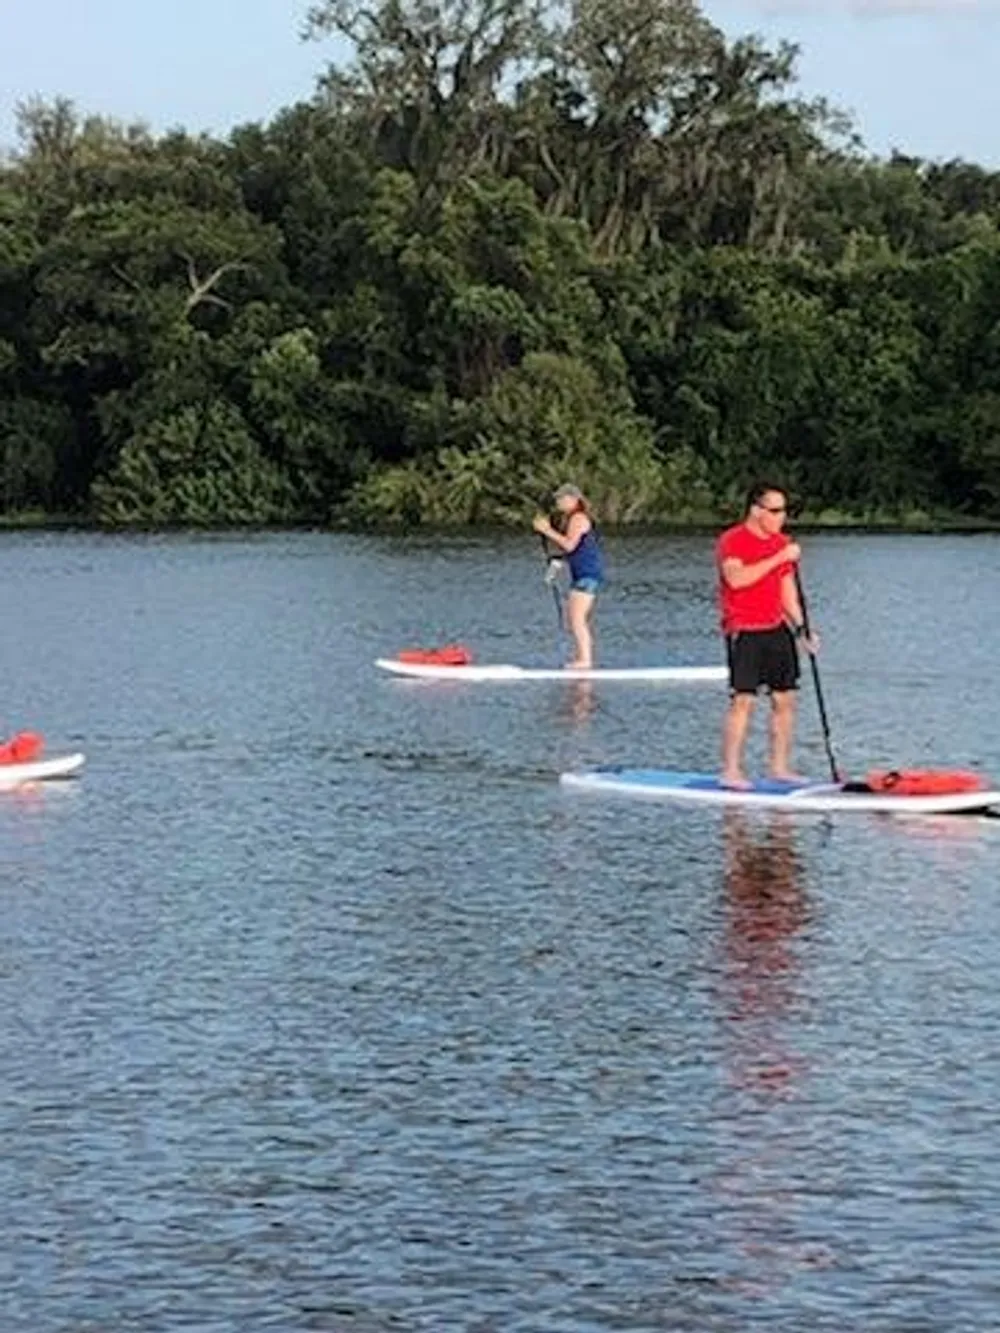 Two people are paddleboarding on calm water with lush greenery in the background